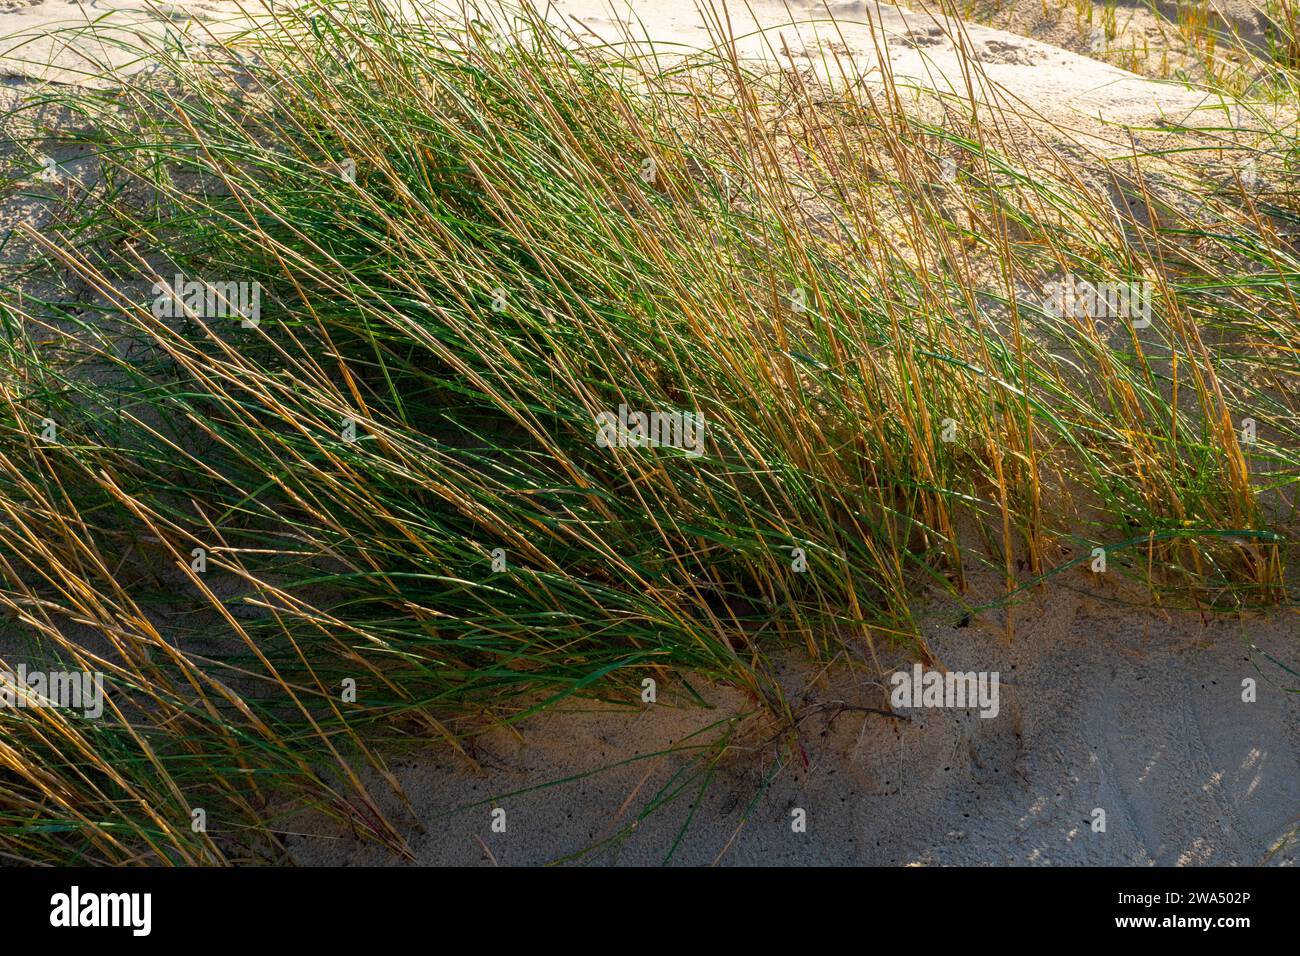 Elymus pungens, the sea couch grass, is a species of grass of the genus Elymus in the family Poaceae. It is a common grass species native to Europe an Stock Photo